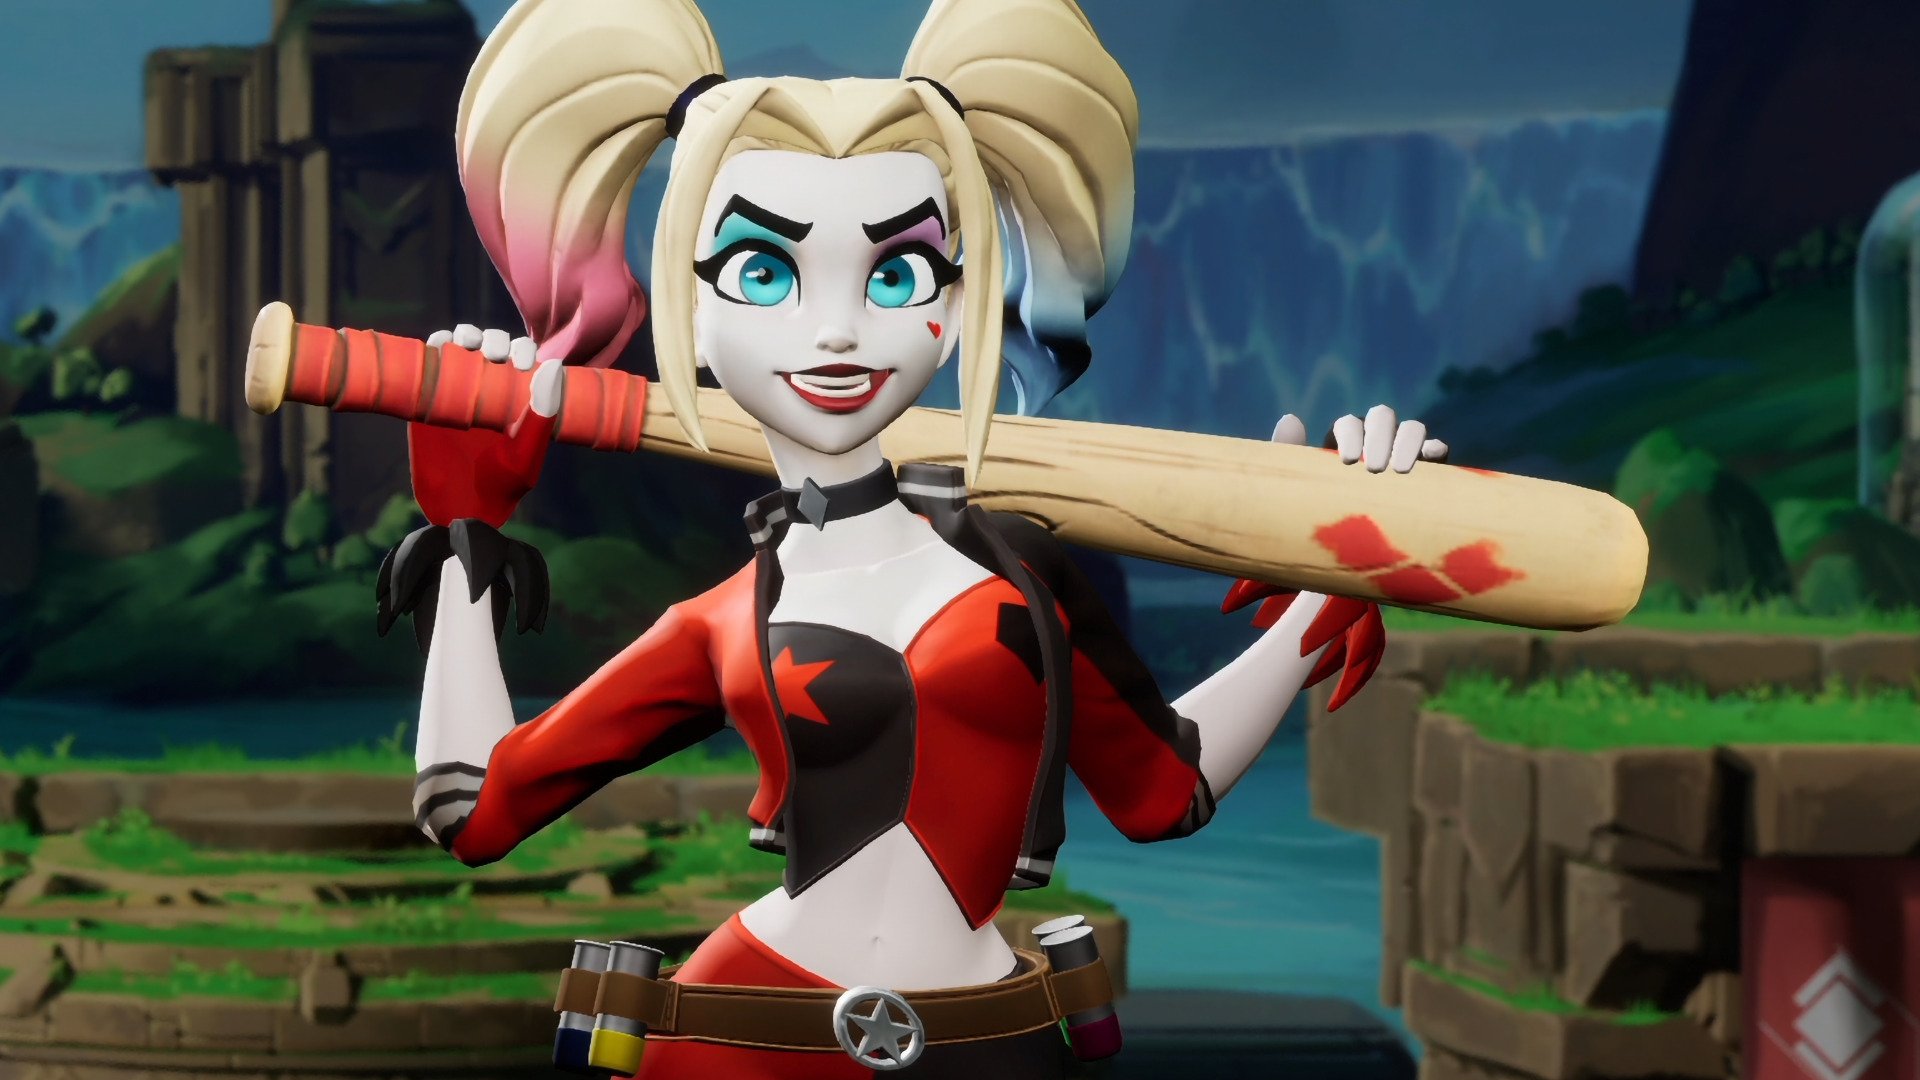 MultiVersus Harley Quinn guide: moves and strategies | VGC